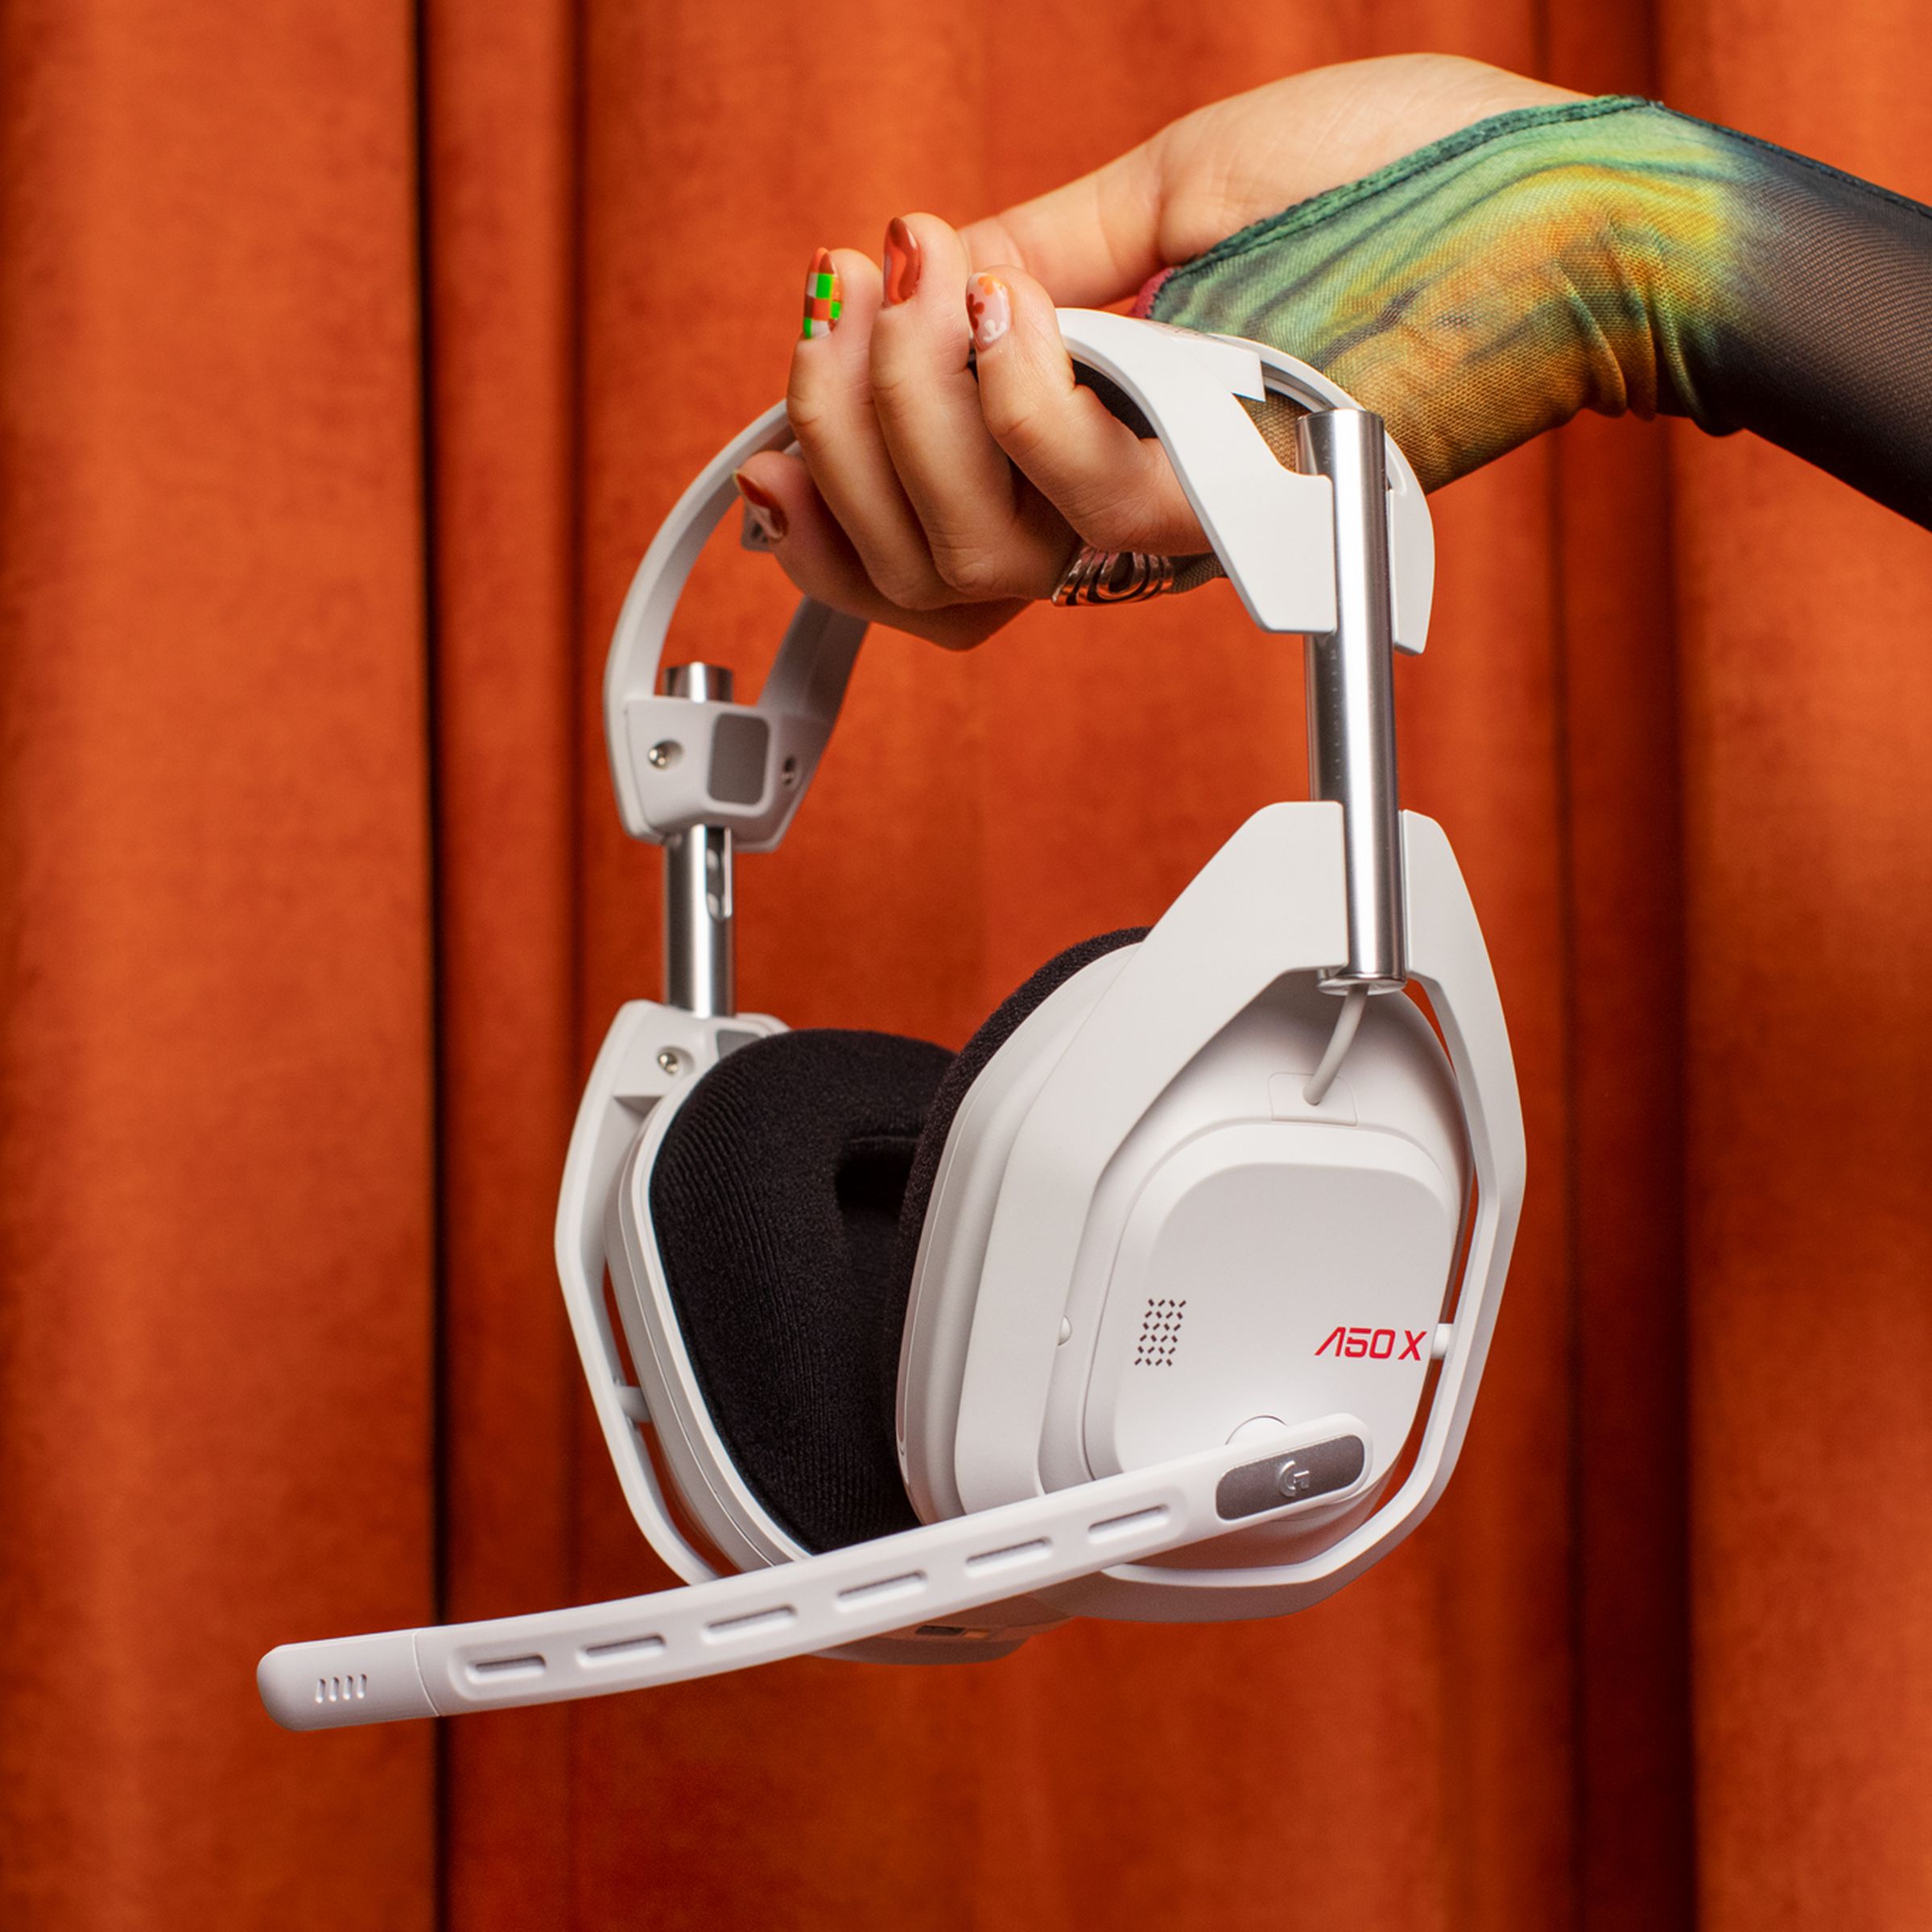 A person’s hand holding the white Astro A50 X gaming headset in front of a fabric backdrop.